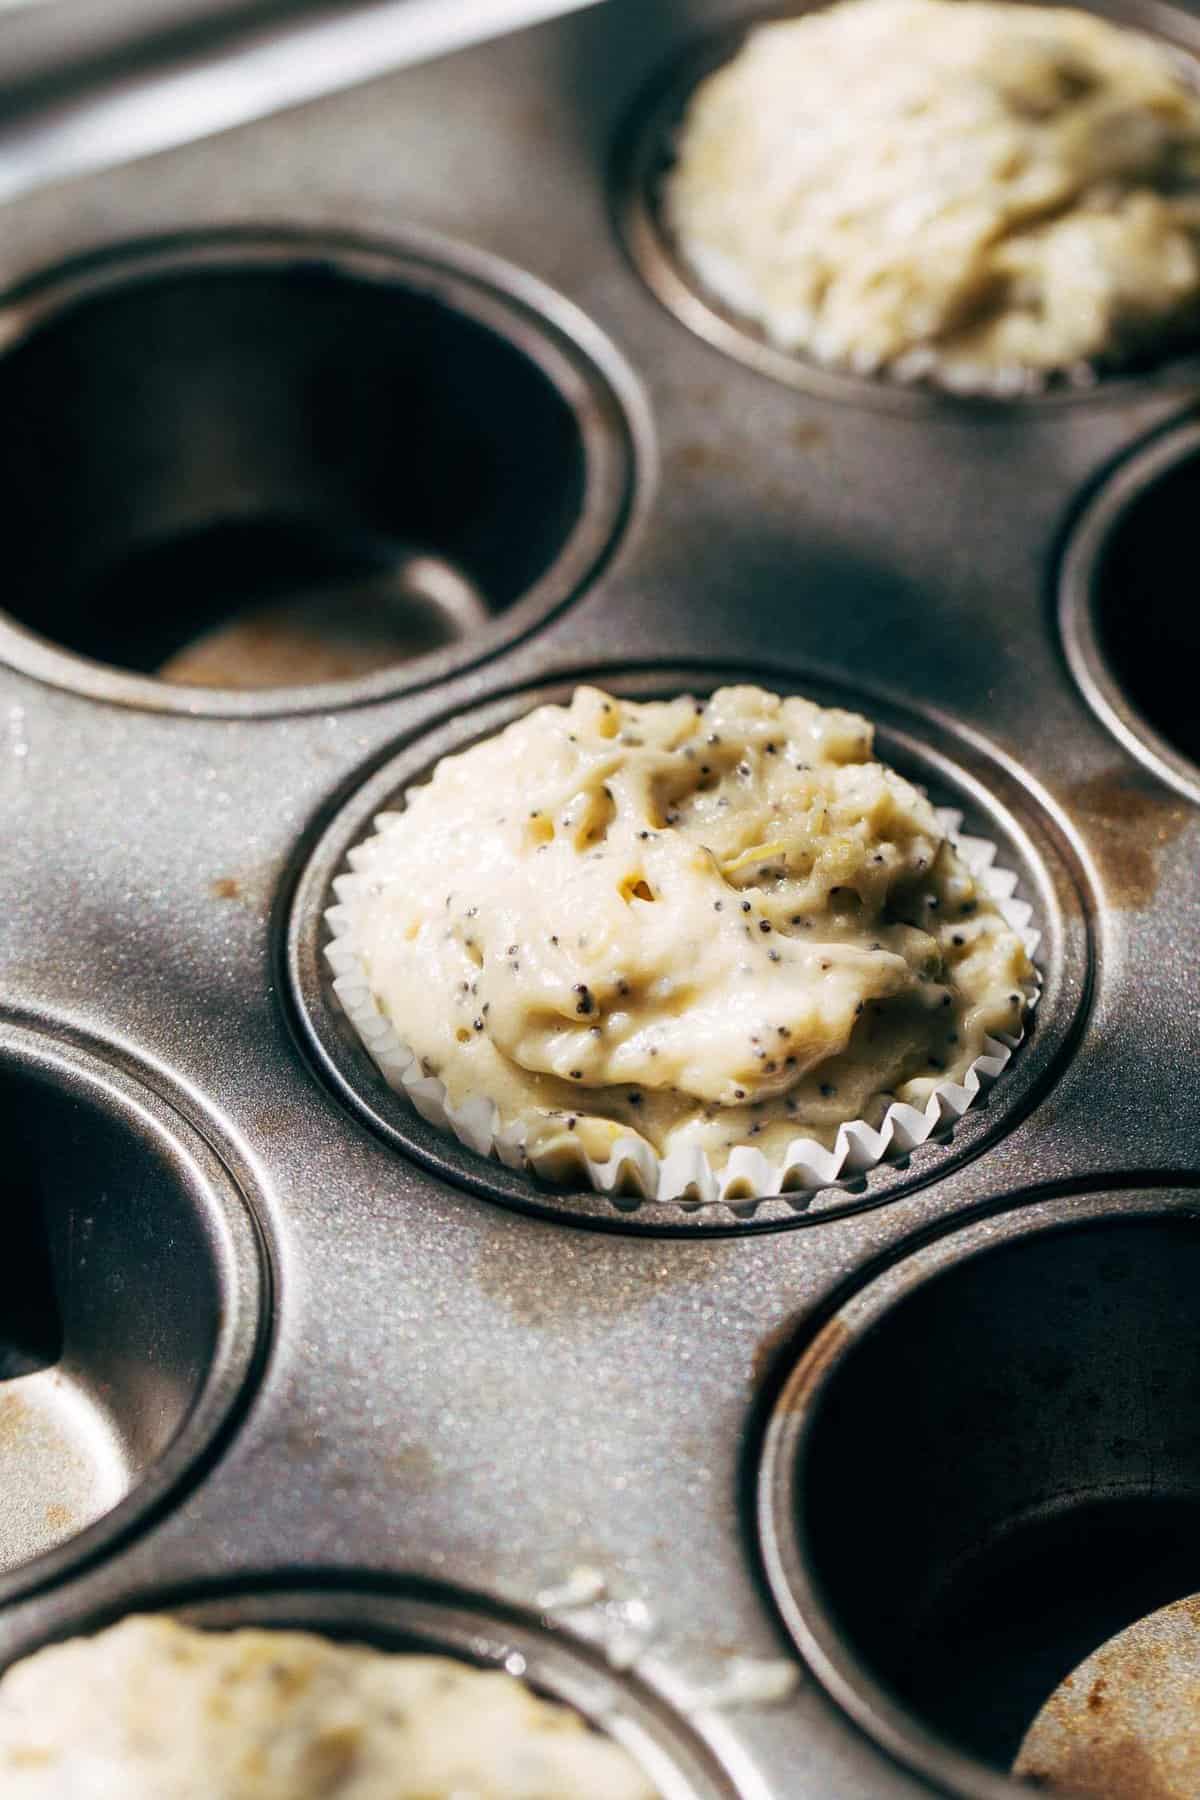 lemon poppy seed muffin batter scooped in a cupcake tin